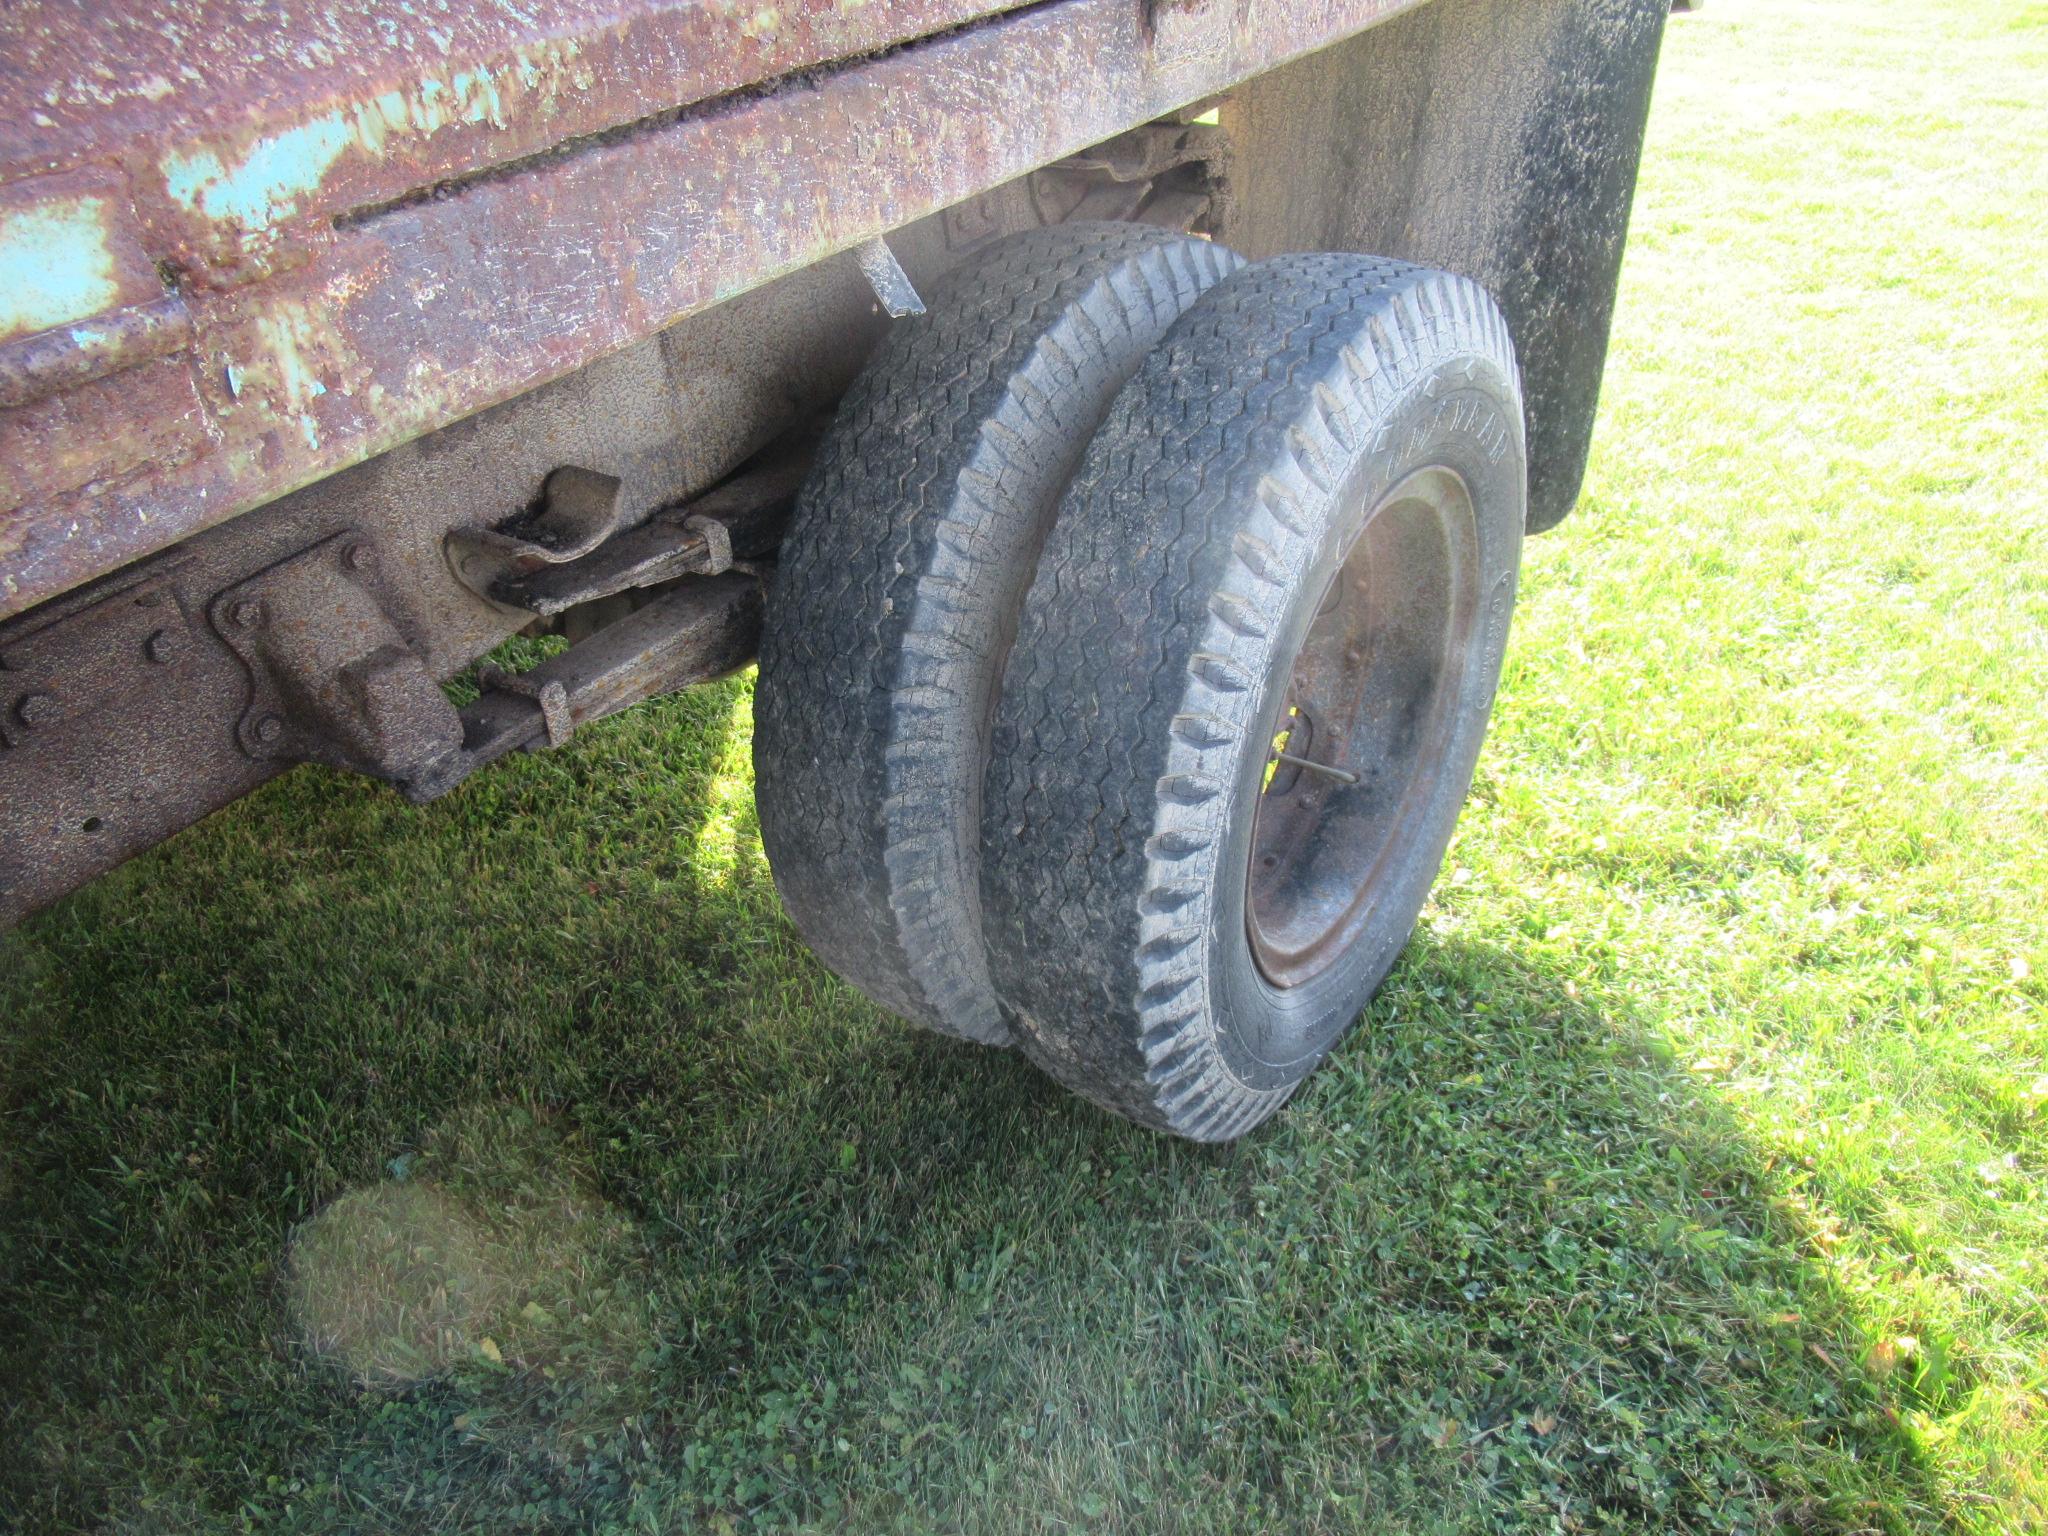 1966 Dodge D500 Dump Truck with 318 Gas, 4 Speed, 2 Speed Rear End.